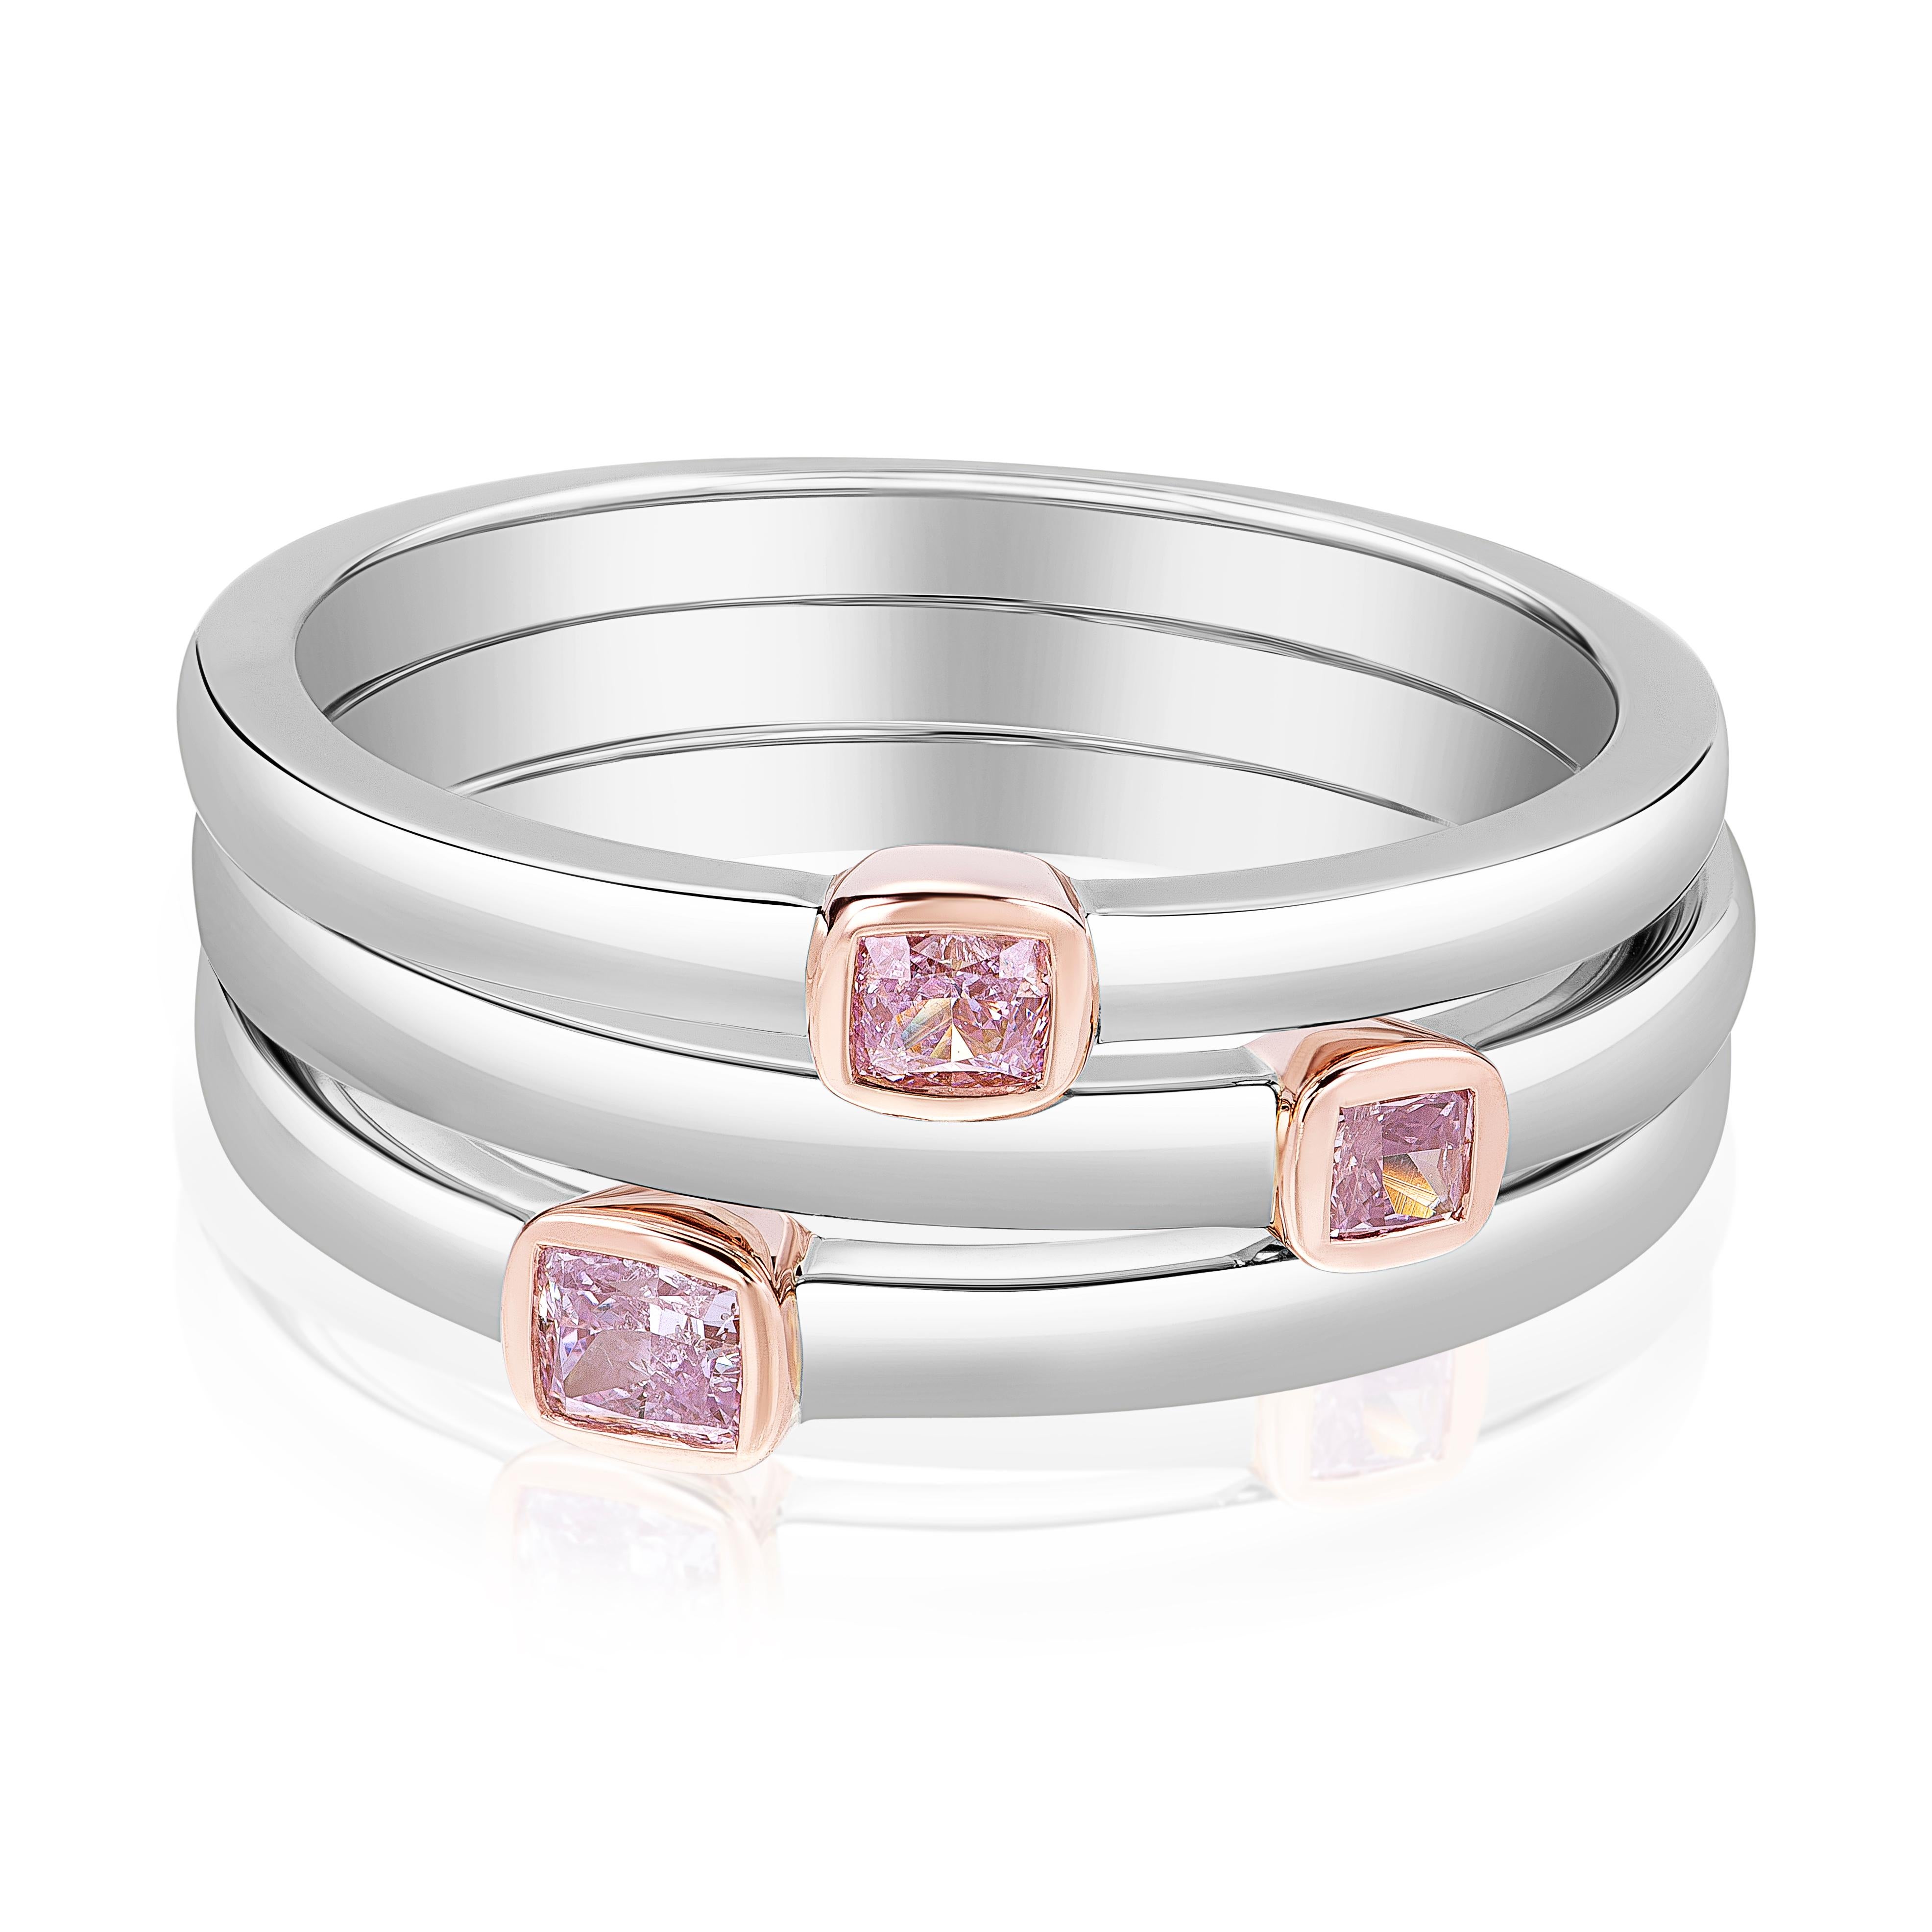 14k Gold Stackable Ring Featuring a 0.08 Pink Diamond Accented by Baguettes For Sale 2